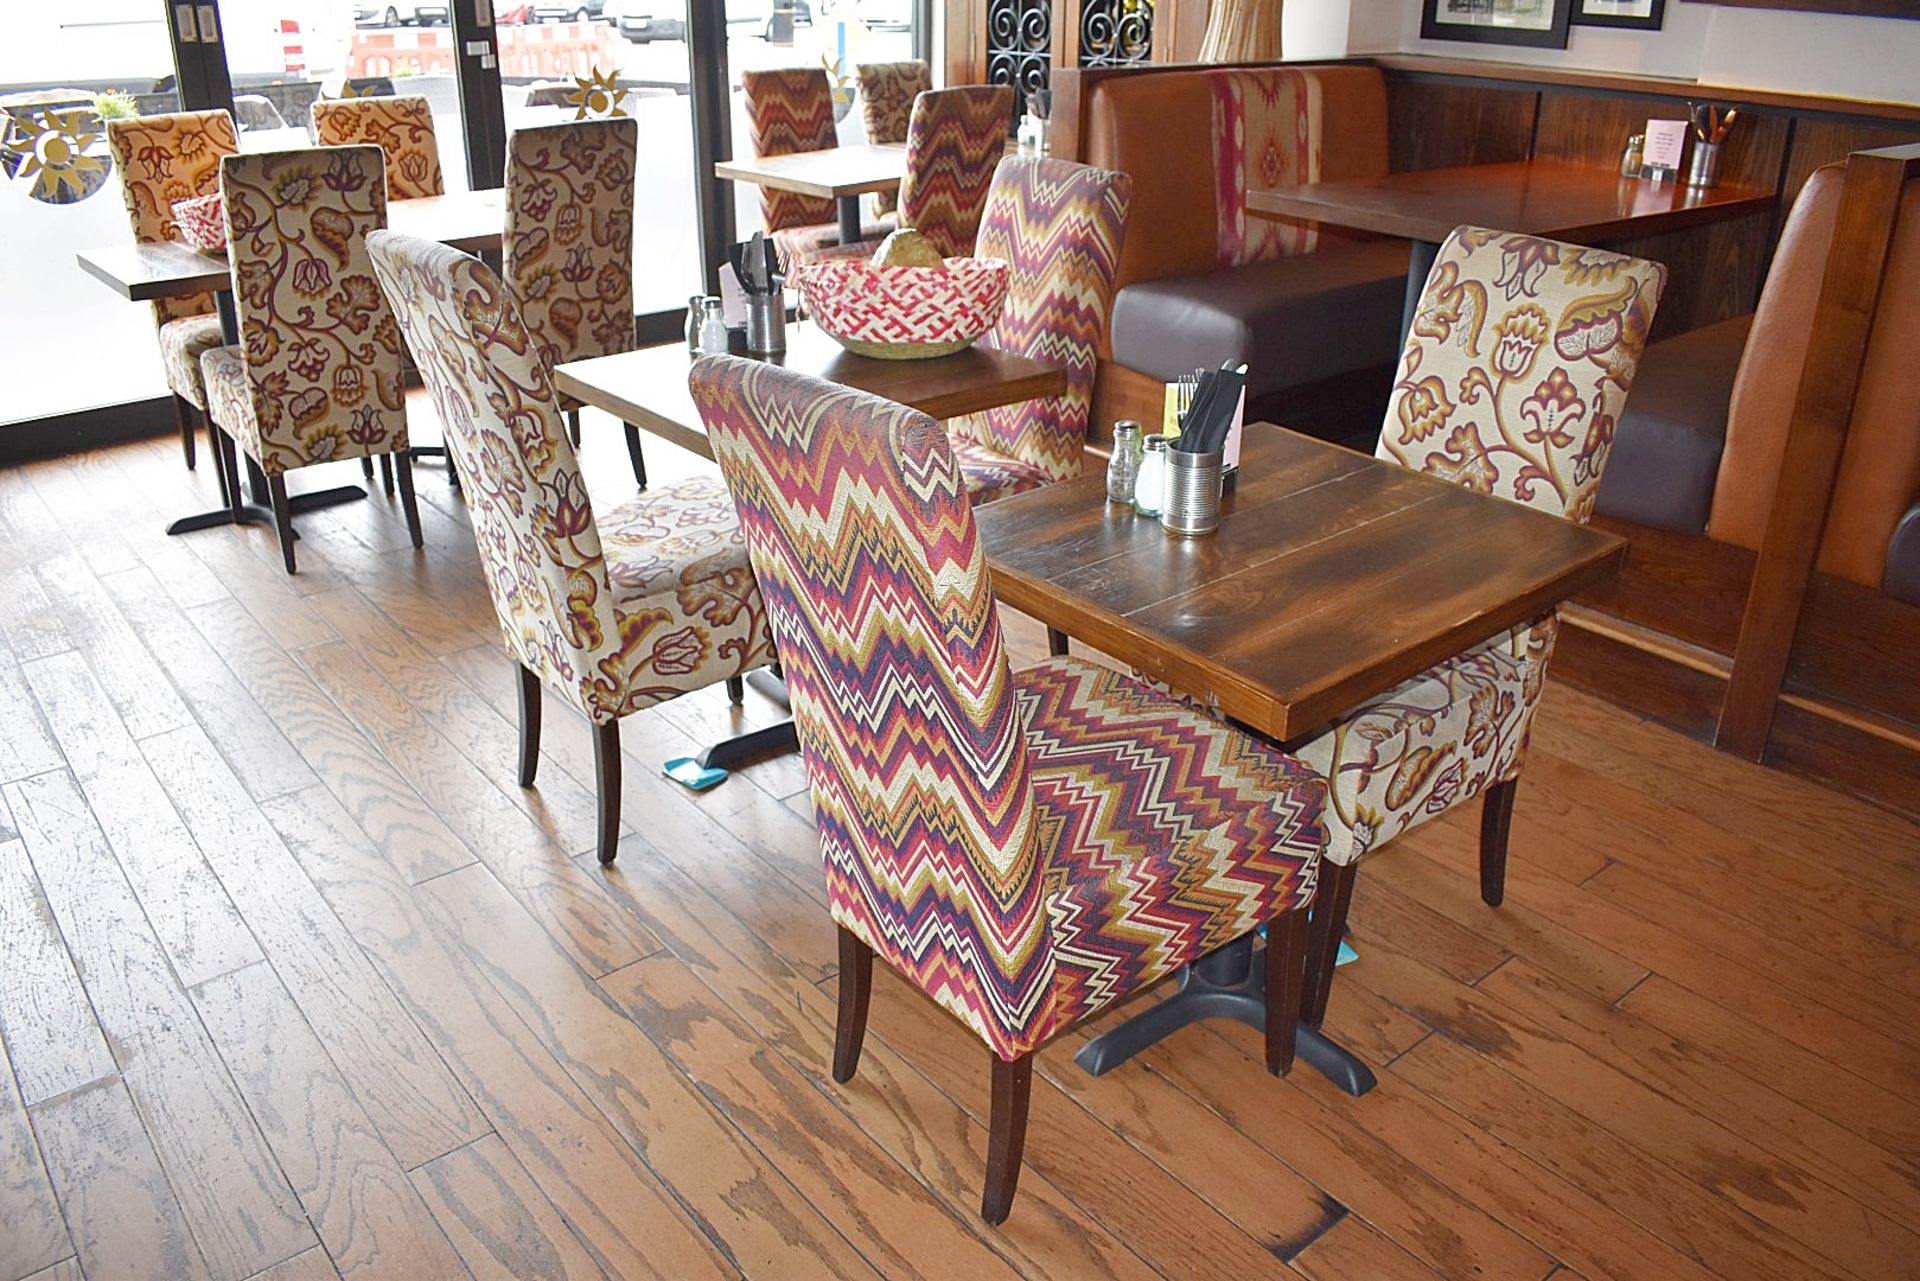 6 x Upholstered Restaurant Dining Chairs In A Zig Zag Mexican-style Fabric - Image 2 of 2